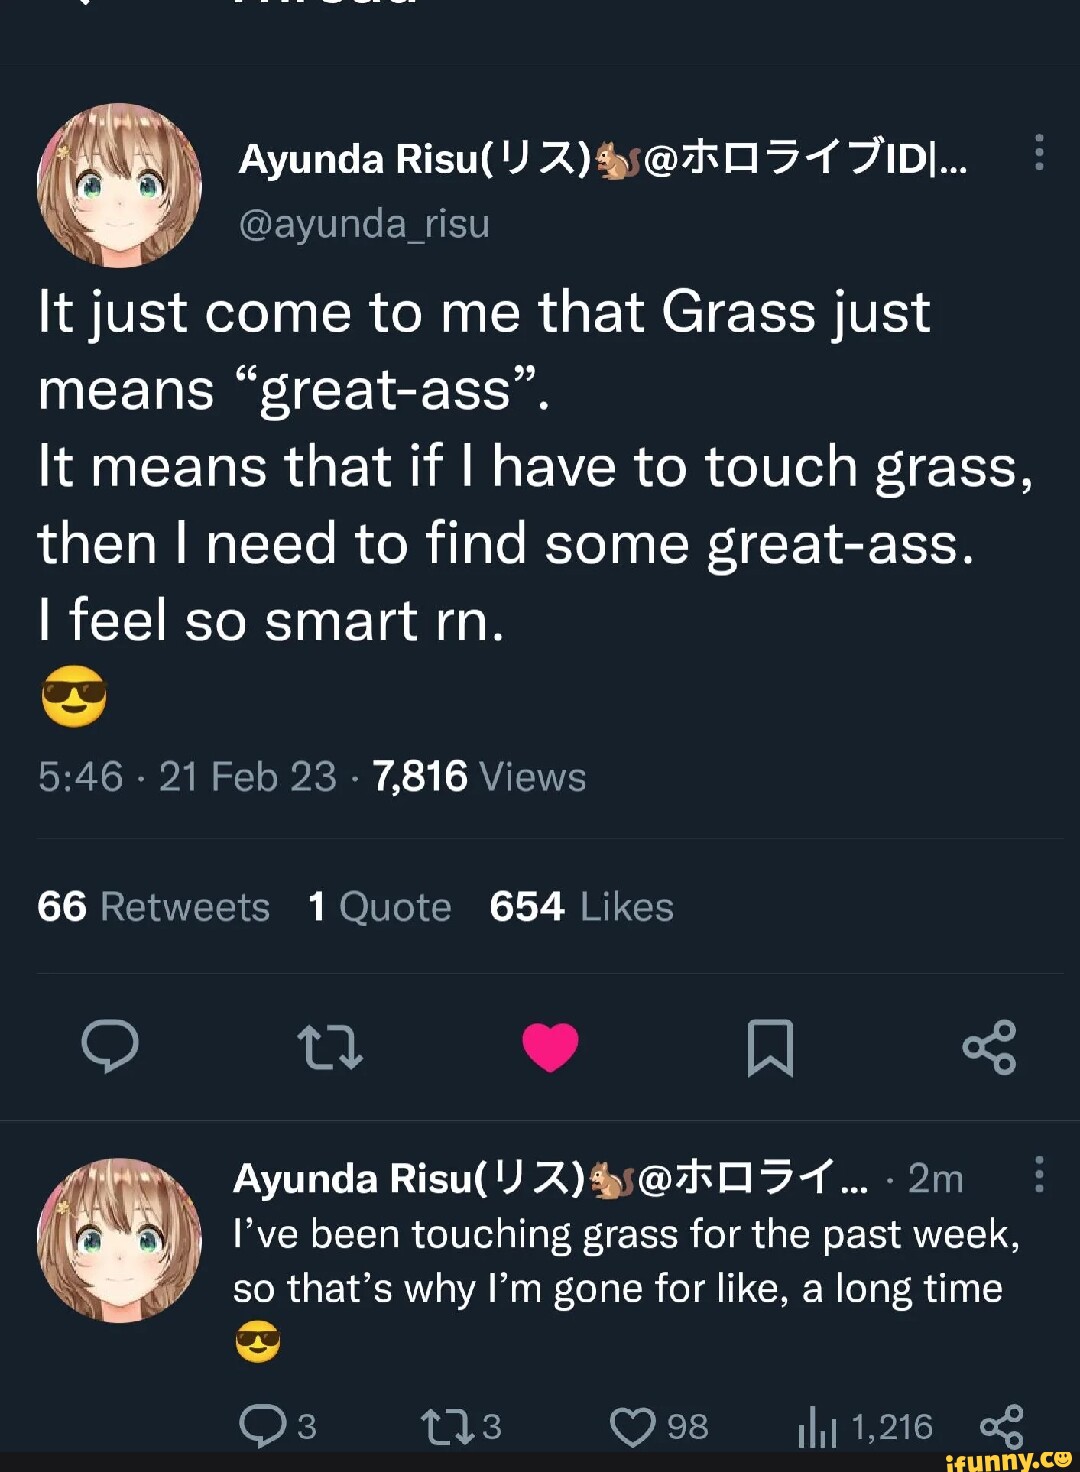 Go Touch Some Grass” Meaning